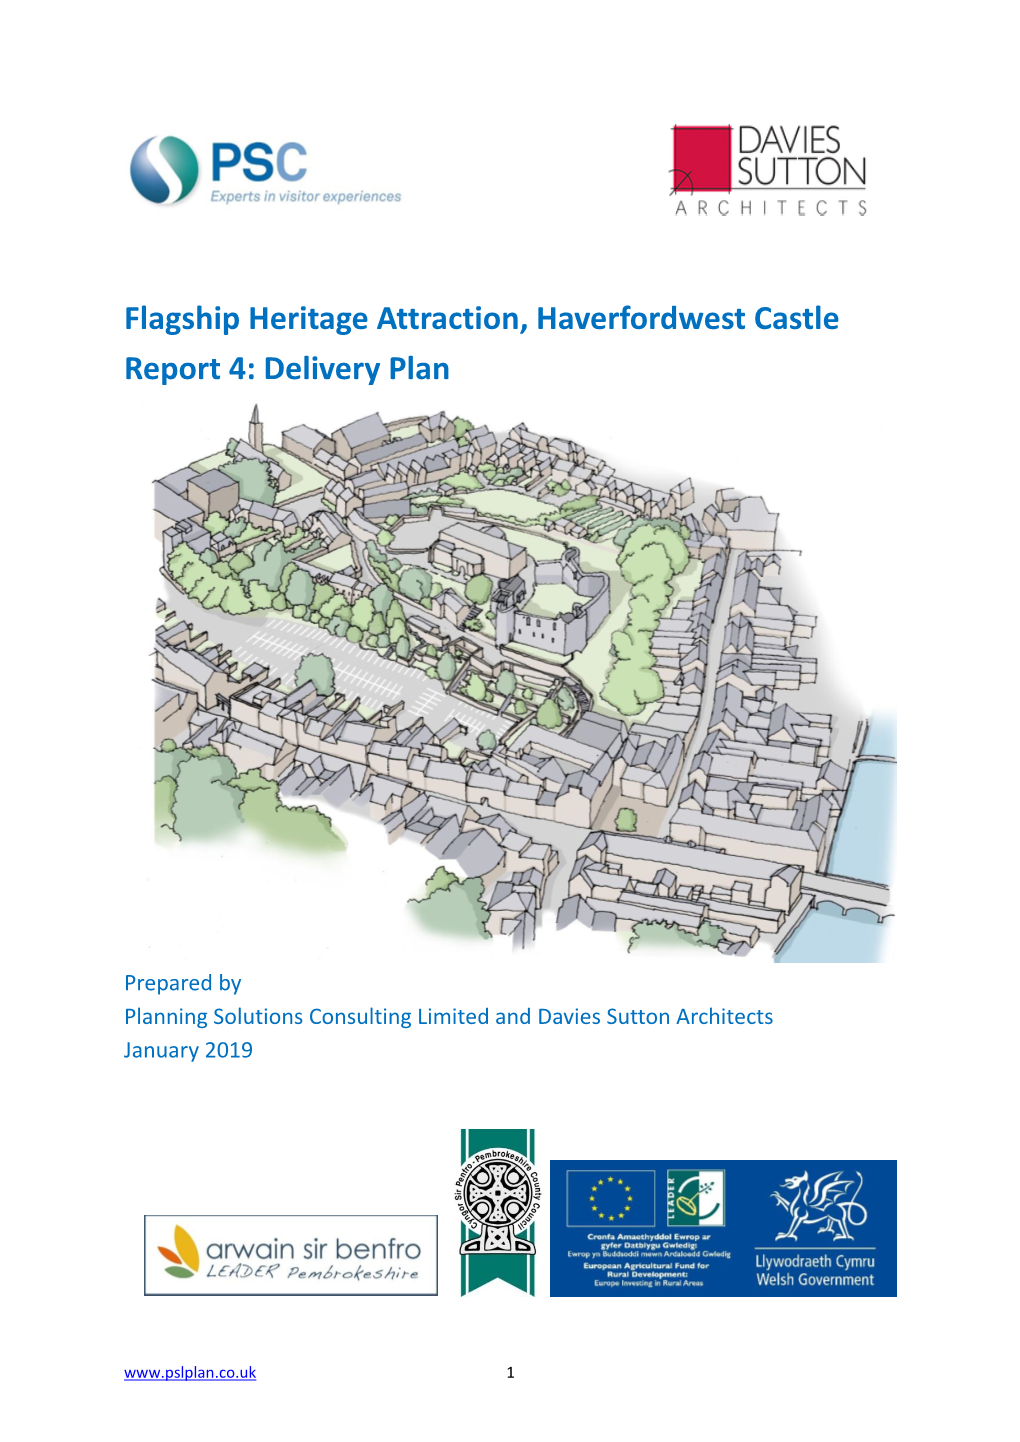 Flagship Heritage Attraction, Haverfordwest Castle Report 4: Delivery Plan